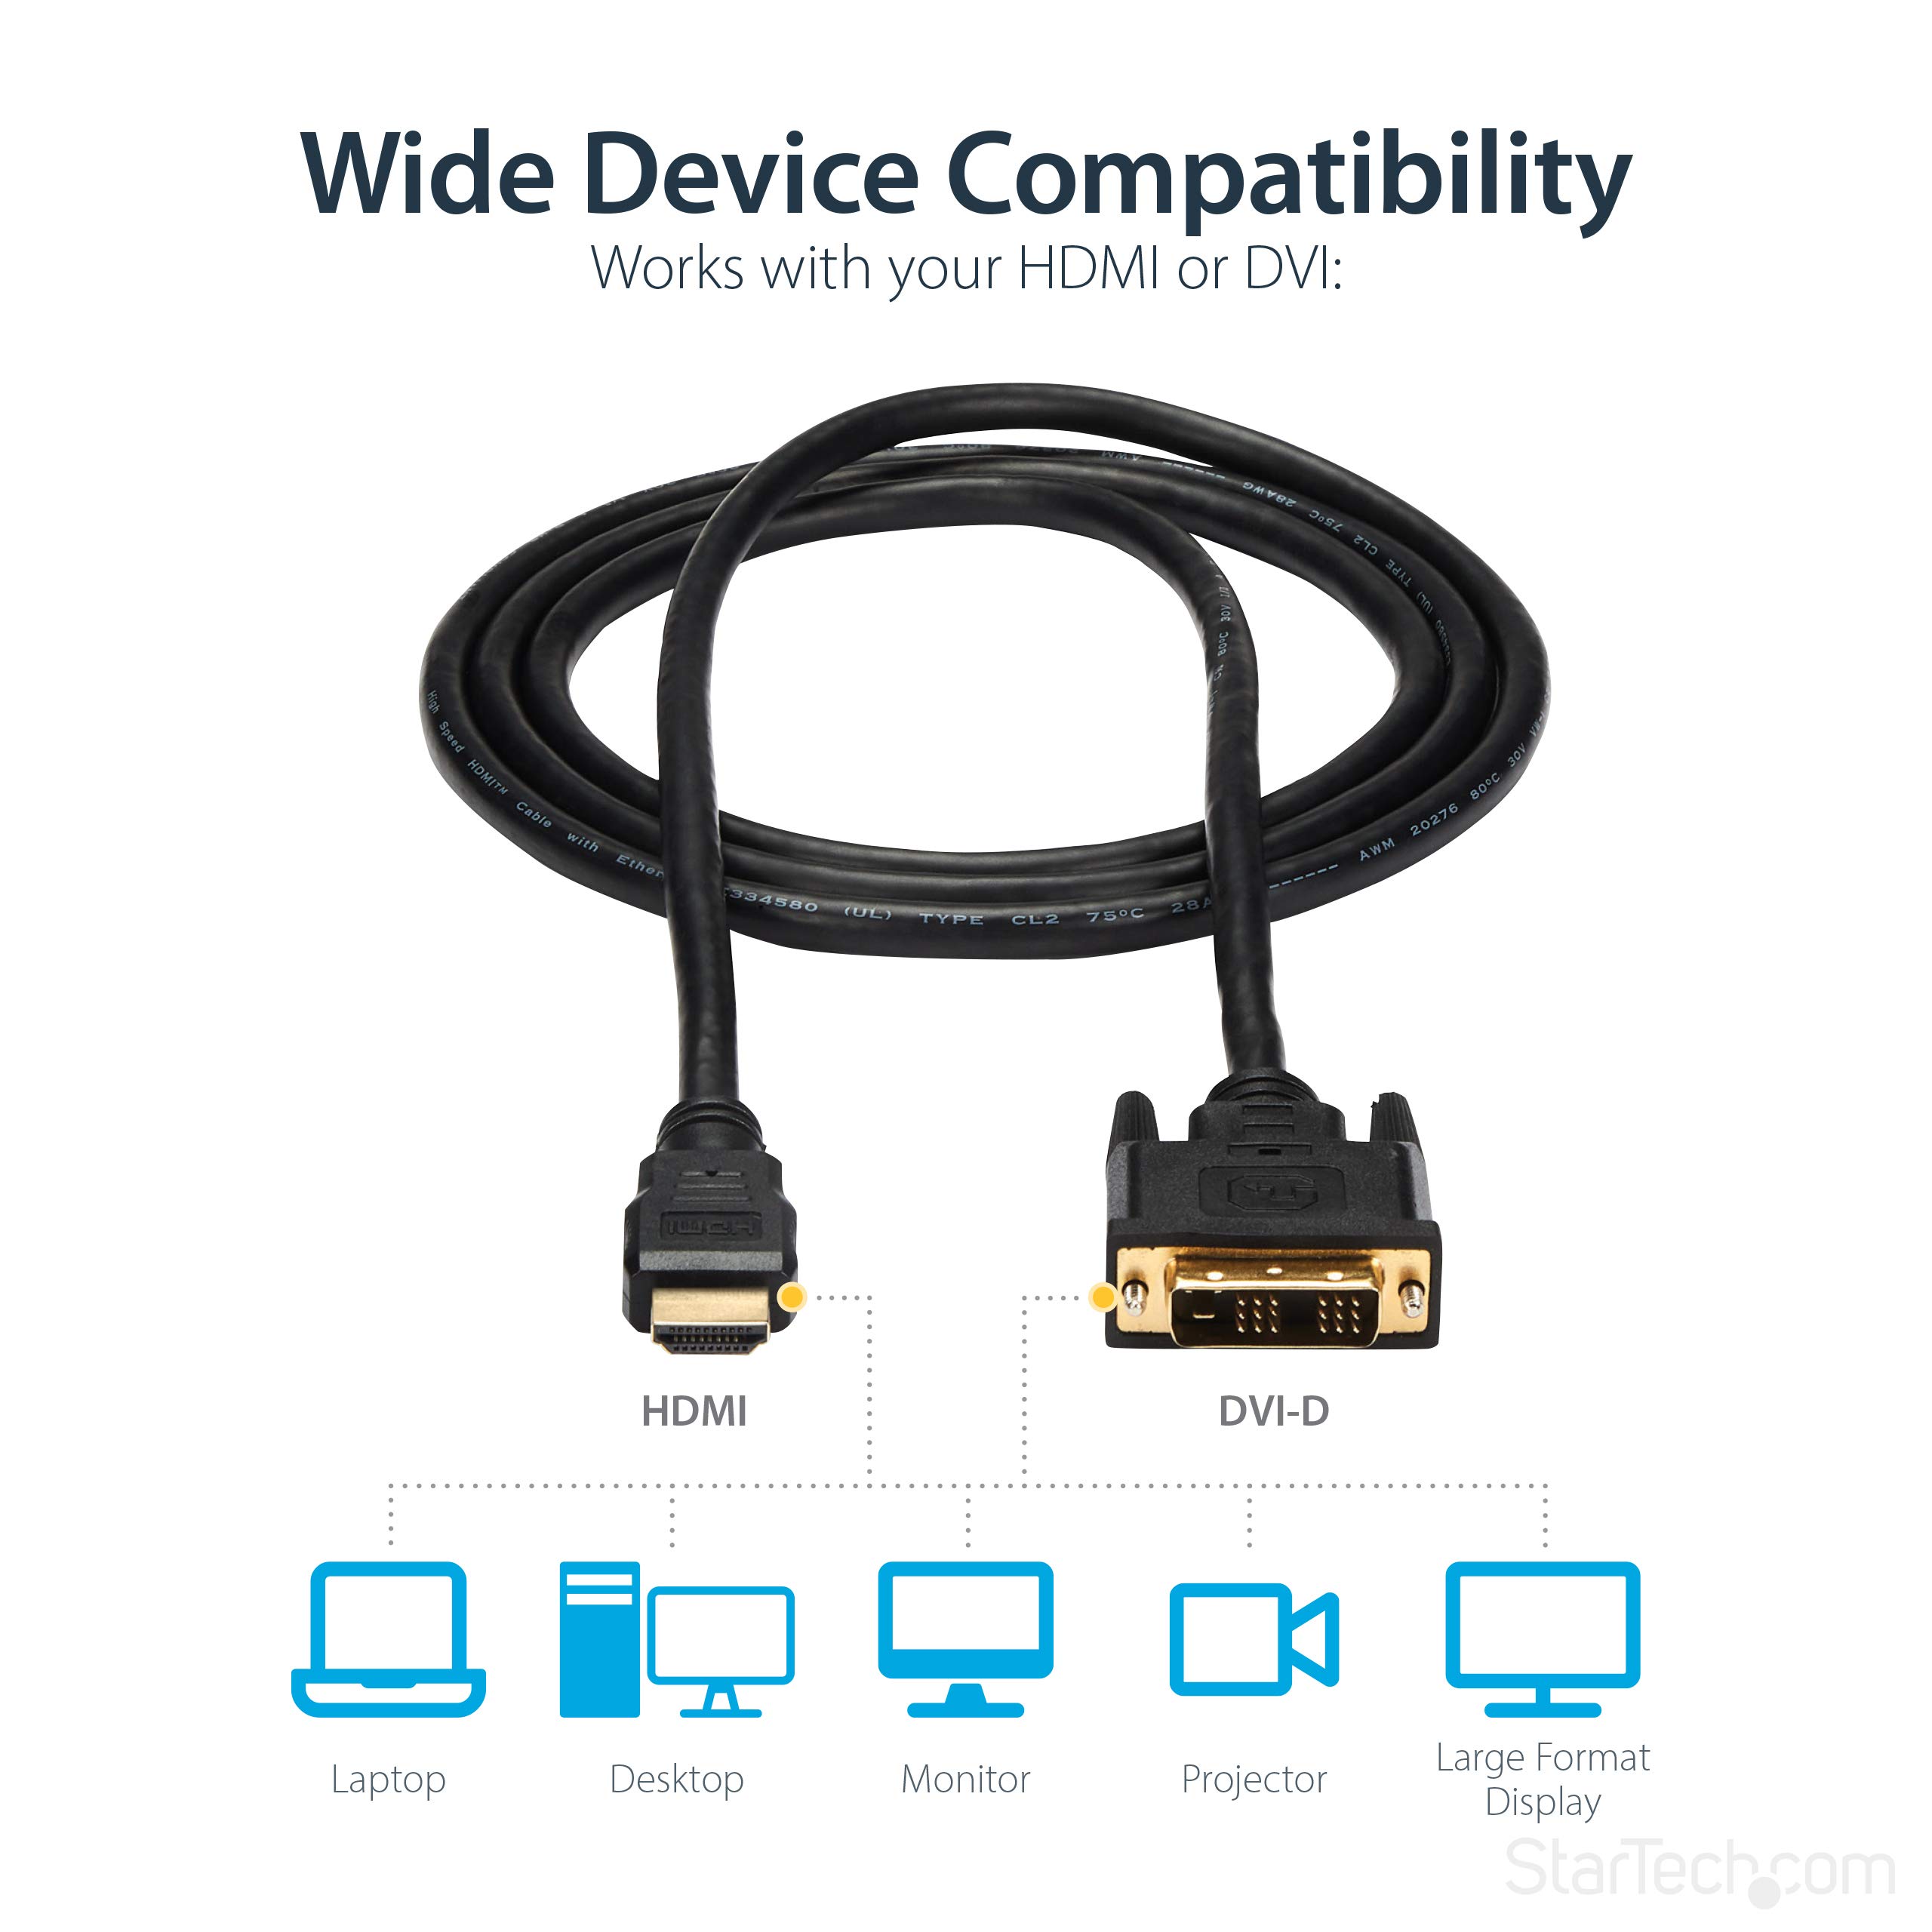 StarTech.com 6ft HDMI to DVI D Adapter Cable - Bi-Directional - HDMI to DVI or DVI to HDMI Adapter for Your Computer Monitor (HDMIDVIMM6)